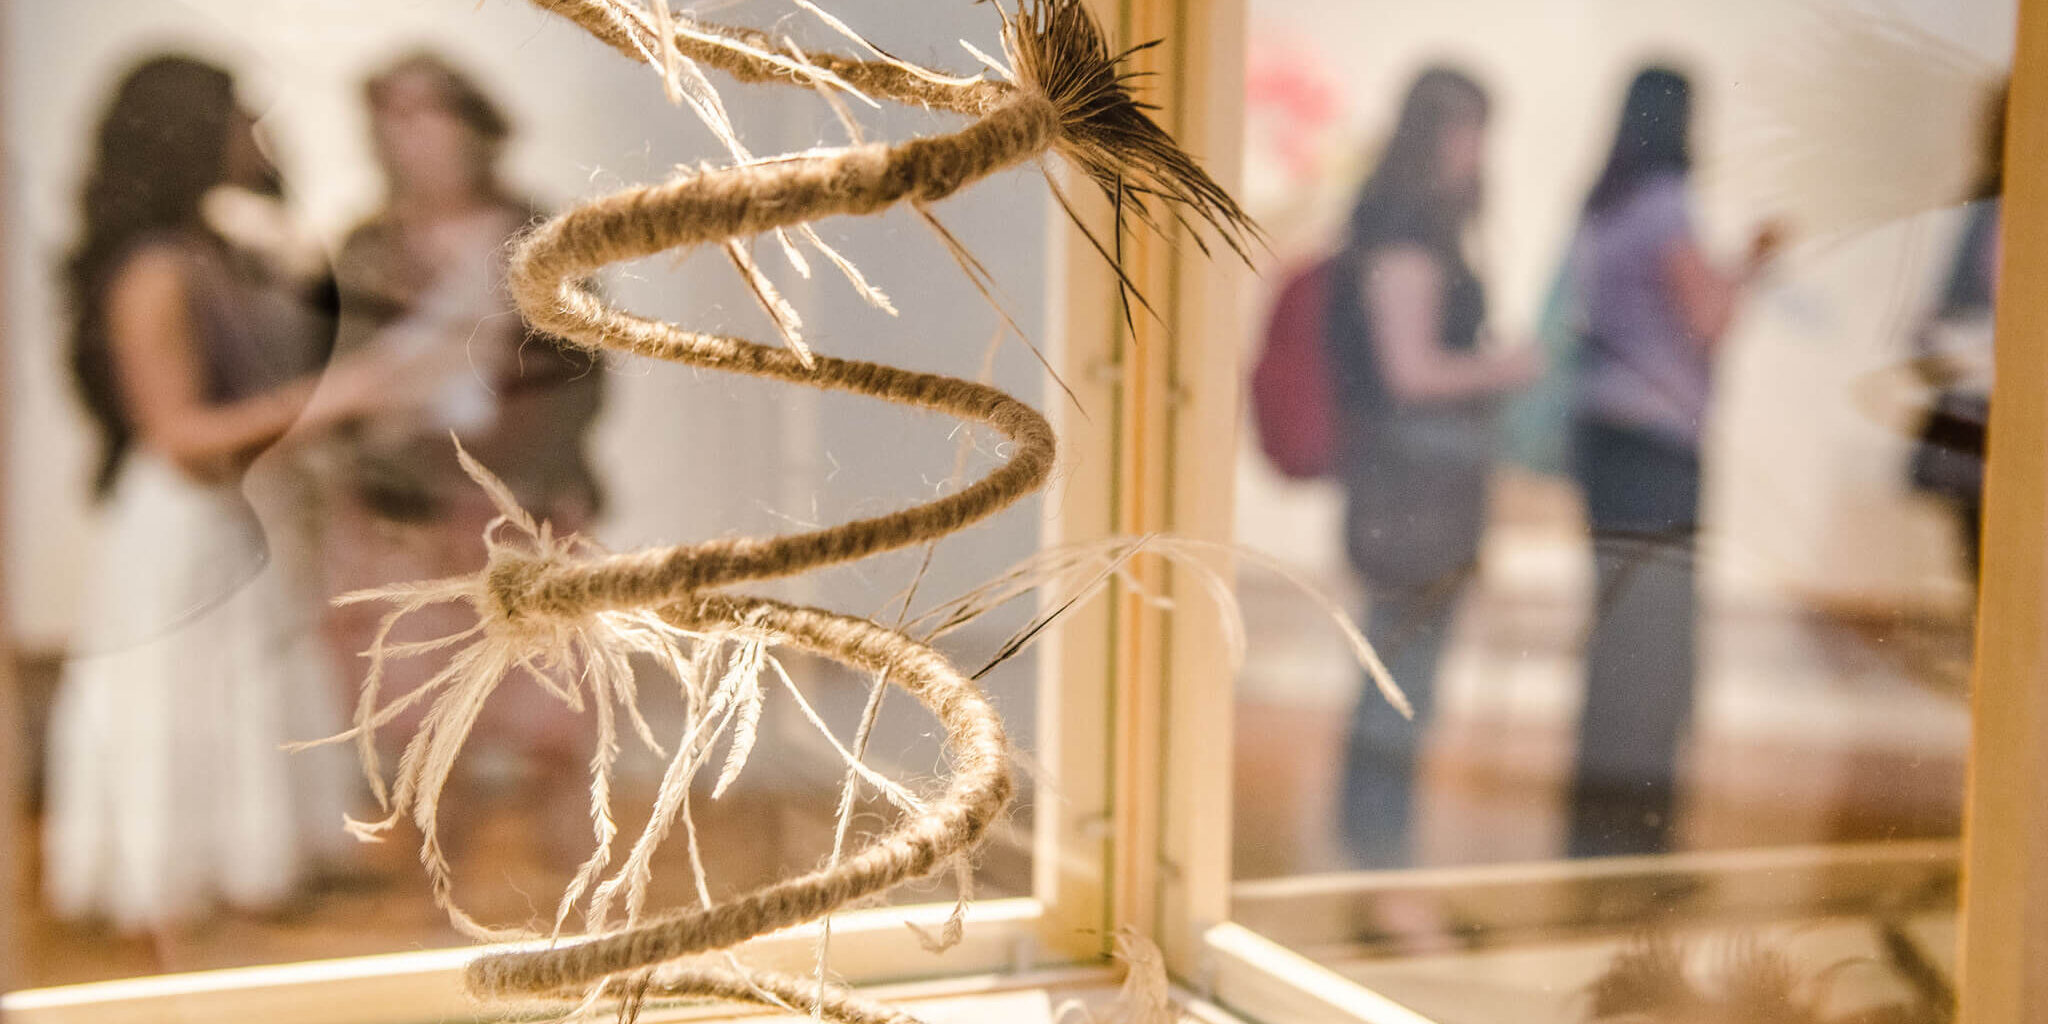 String sculpture with blurred people in background